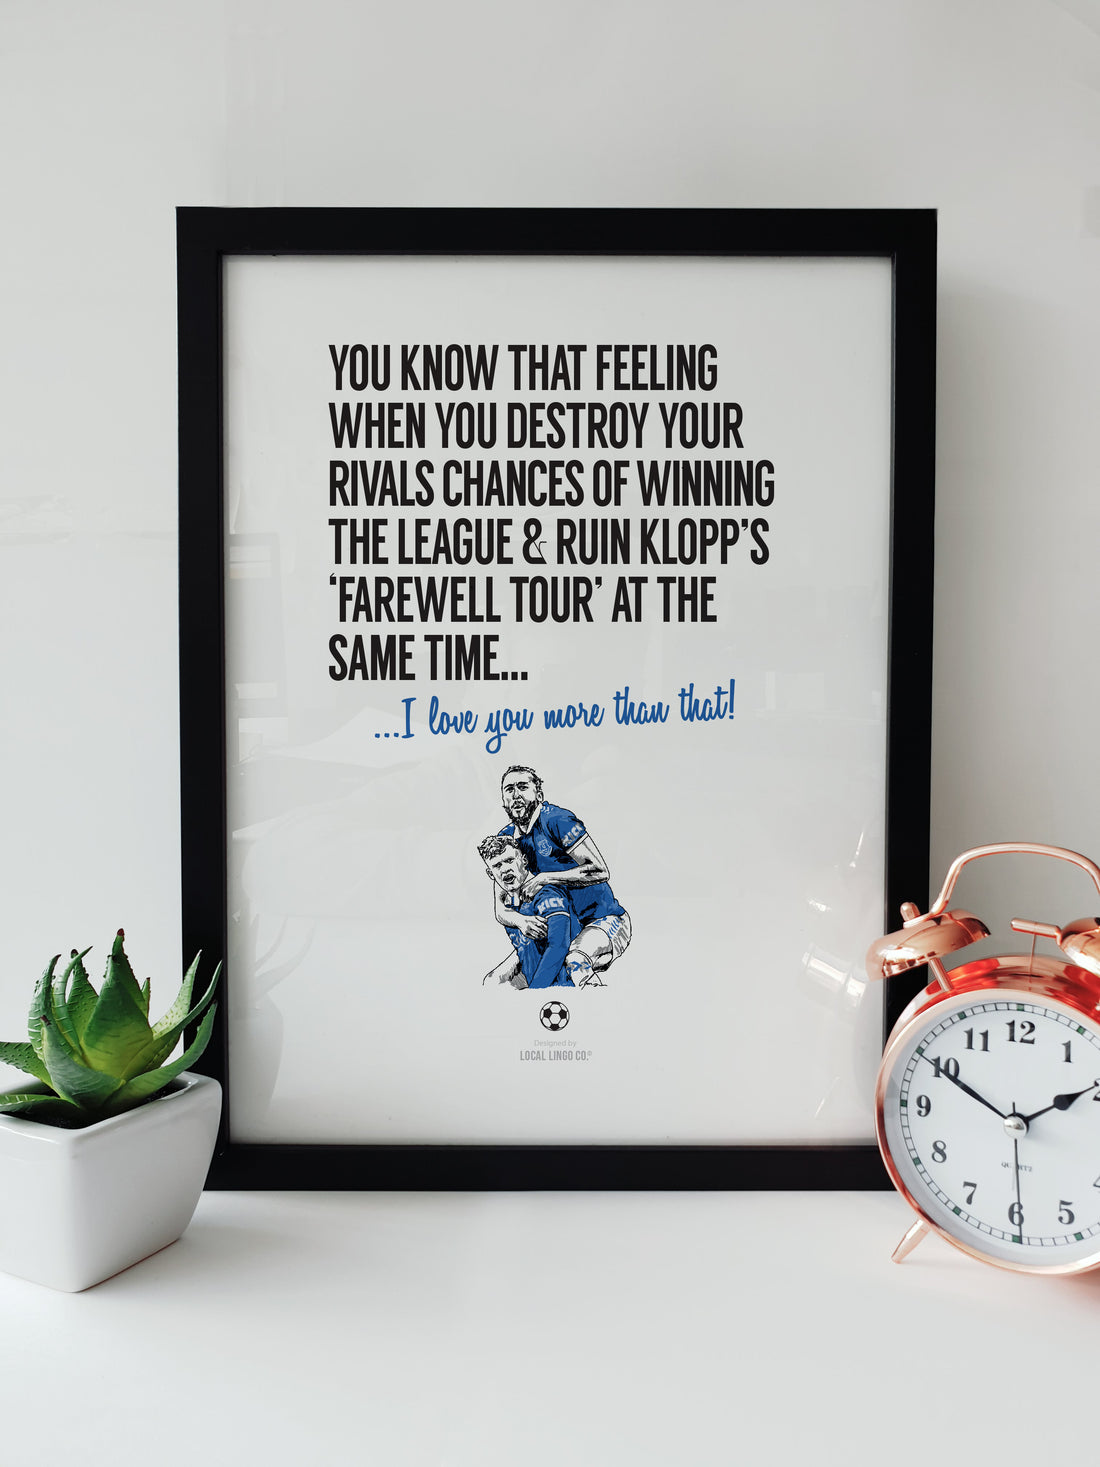 Illustrative Everton victory print with text commemorating their 2-0 win over Liverpool, capturing the spirit of the derby. HANDRAWN ILLUSTRATION OF Branthwaite & Dominic Calvert-Lewin CELEBRATING